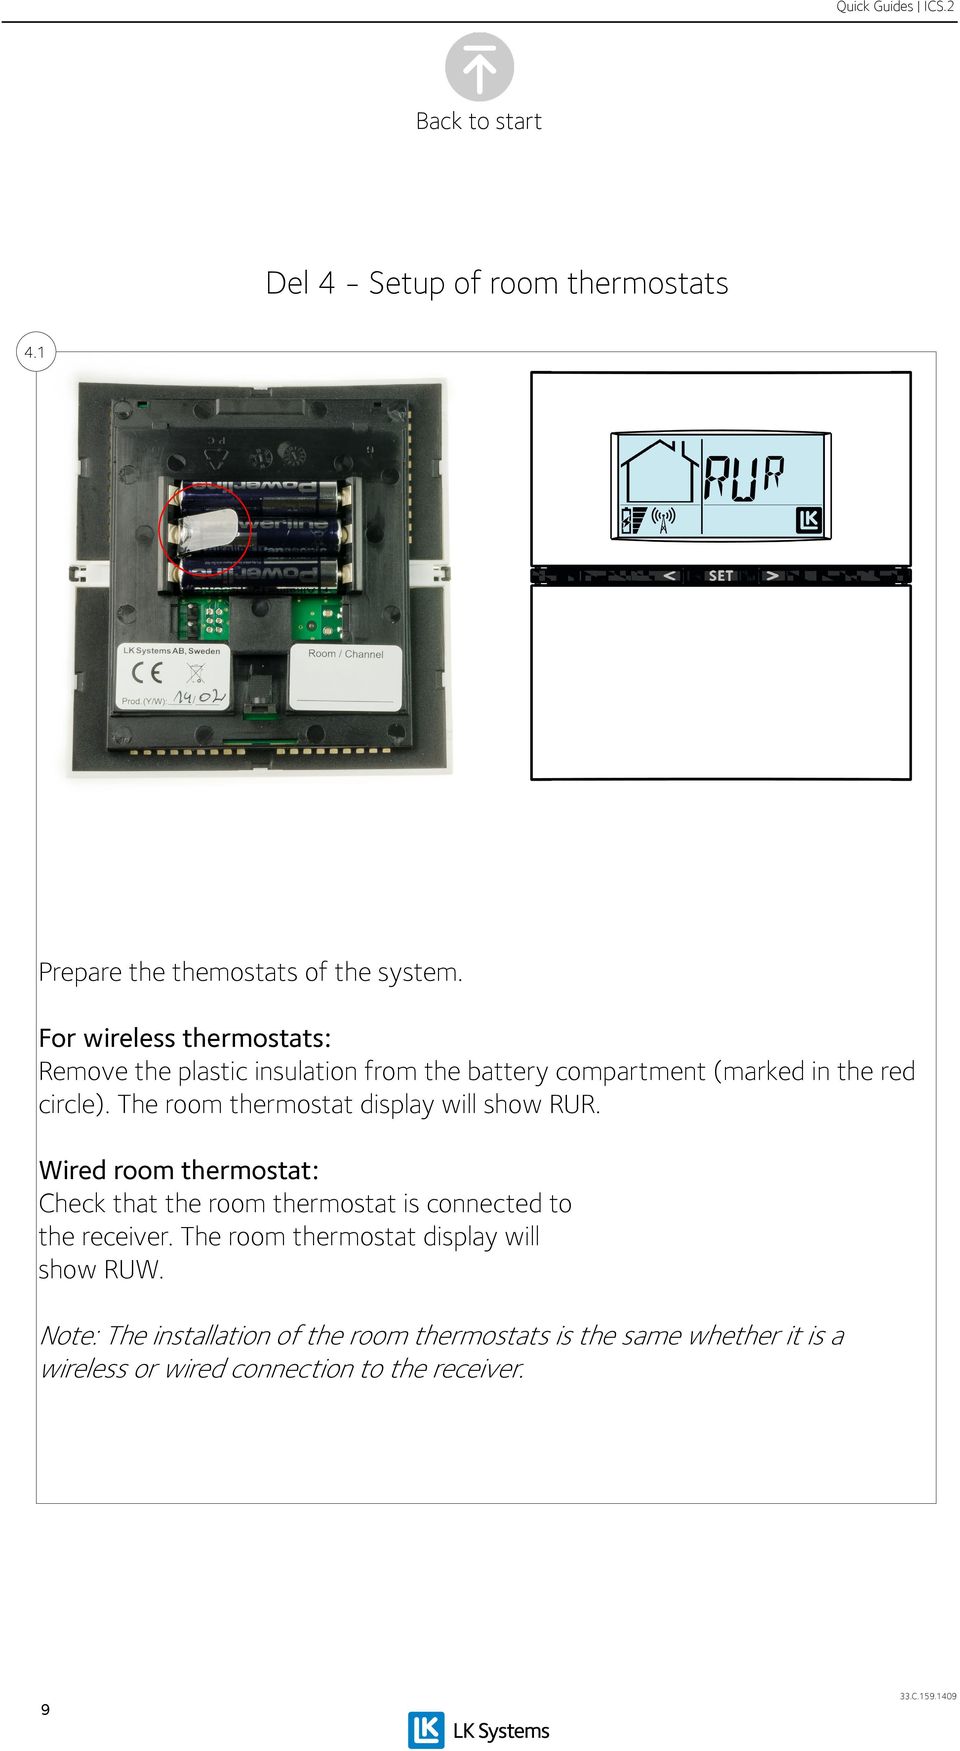 The room thermostat display will show RUR.